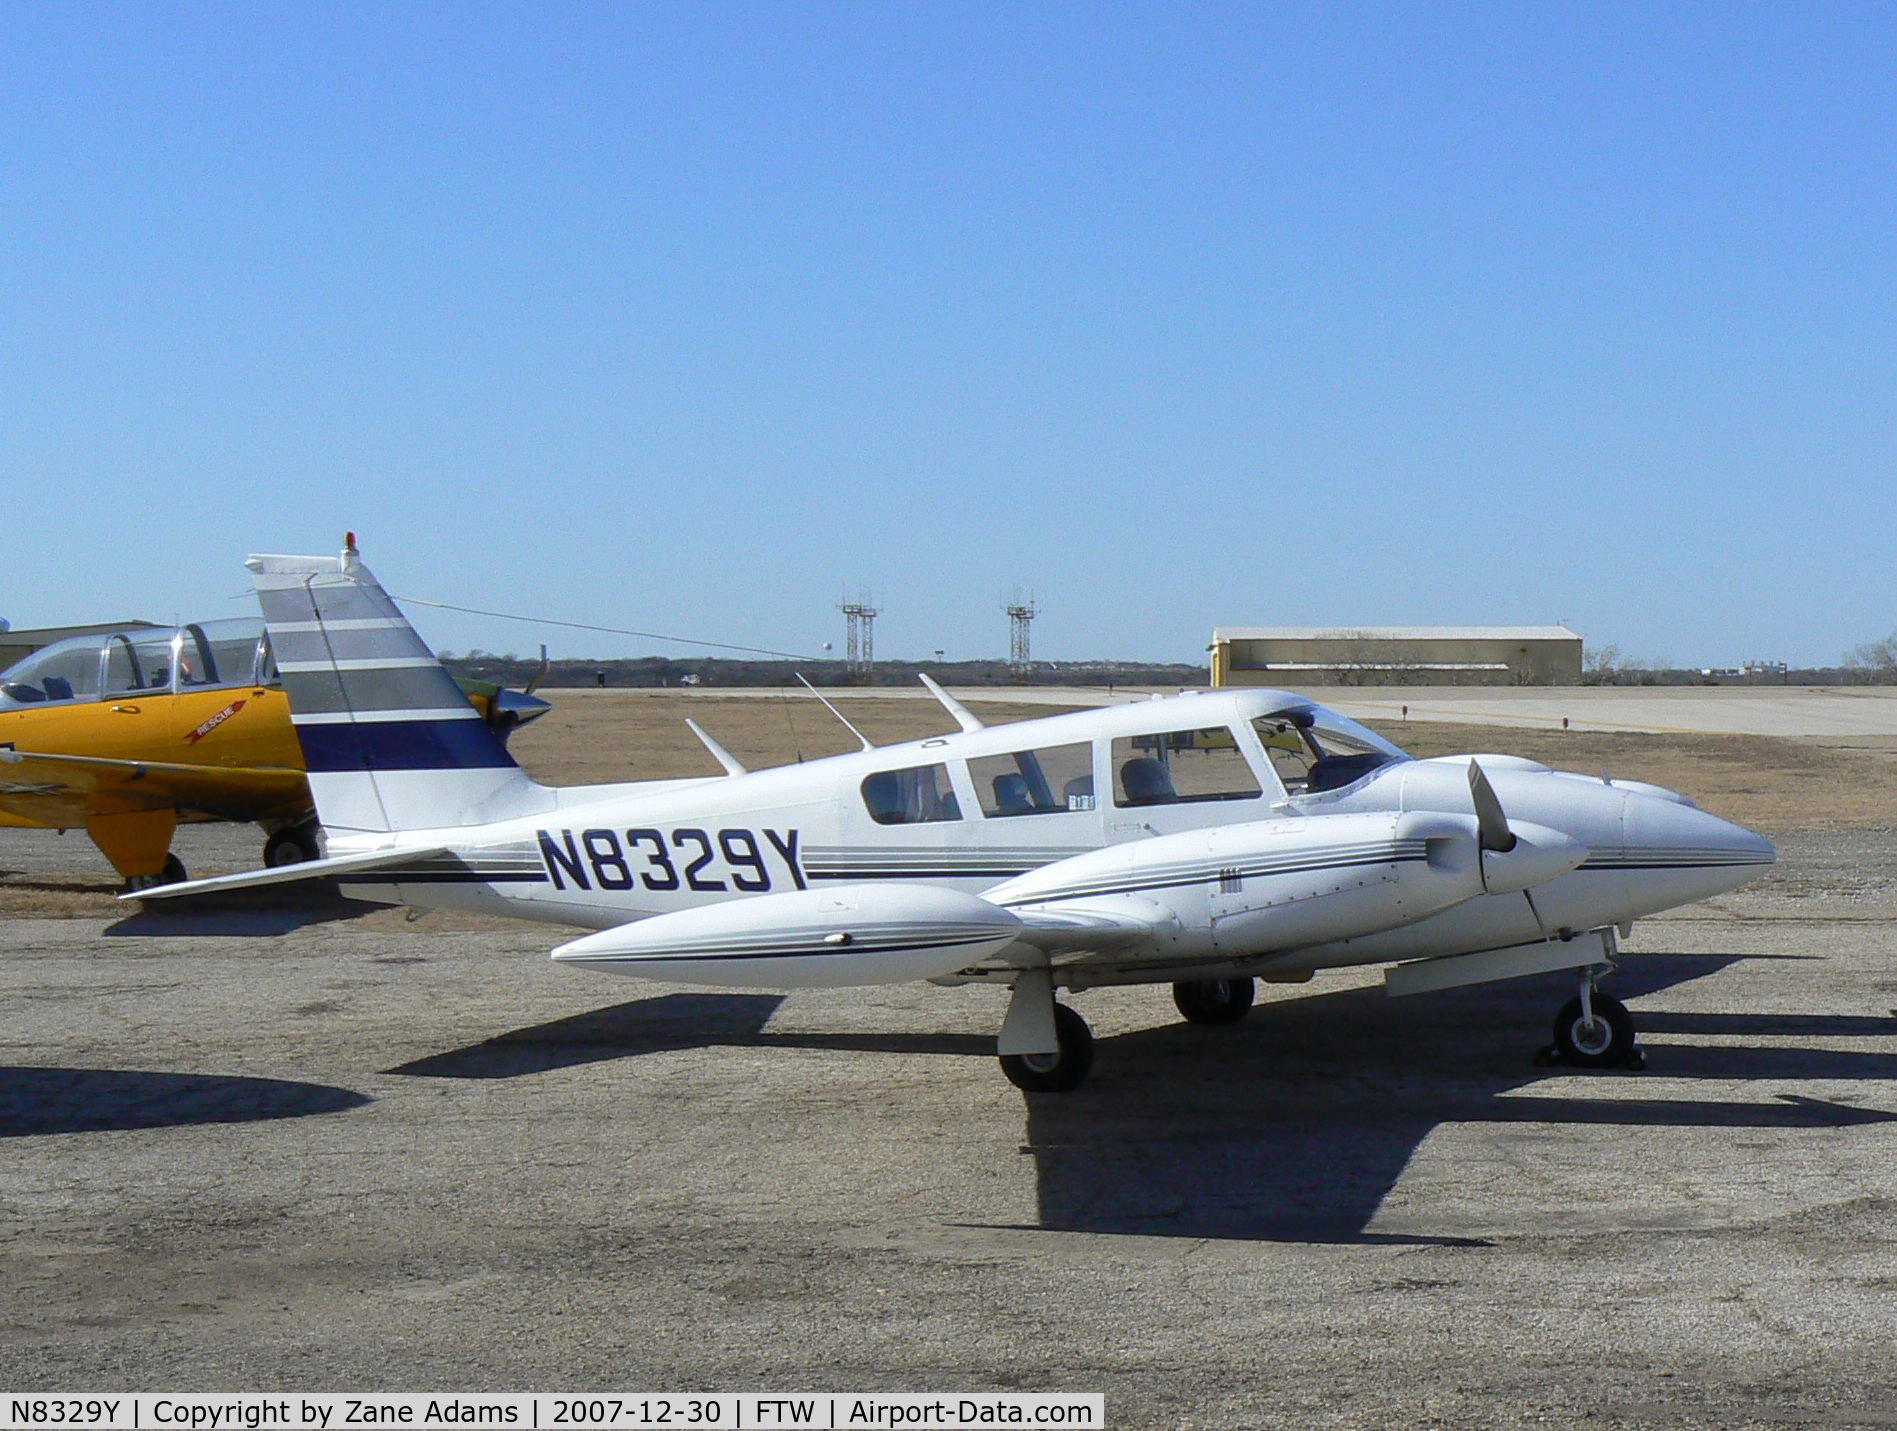 N8329Y, 1967 Piper PA-30 Twin Comanche C/N 30-1471, At The Vintage Flying Museum